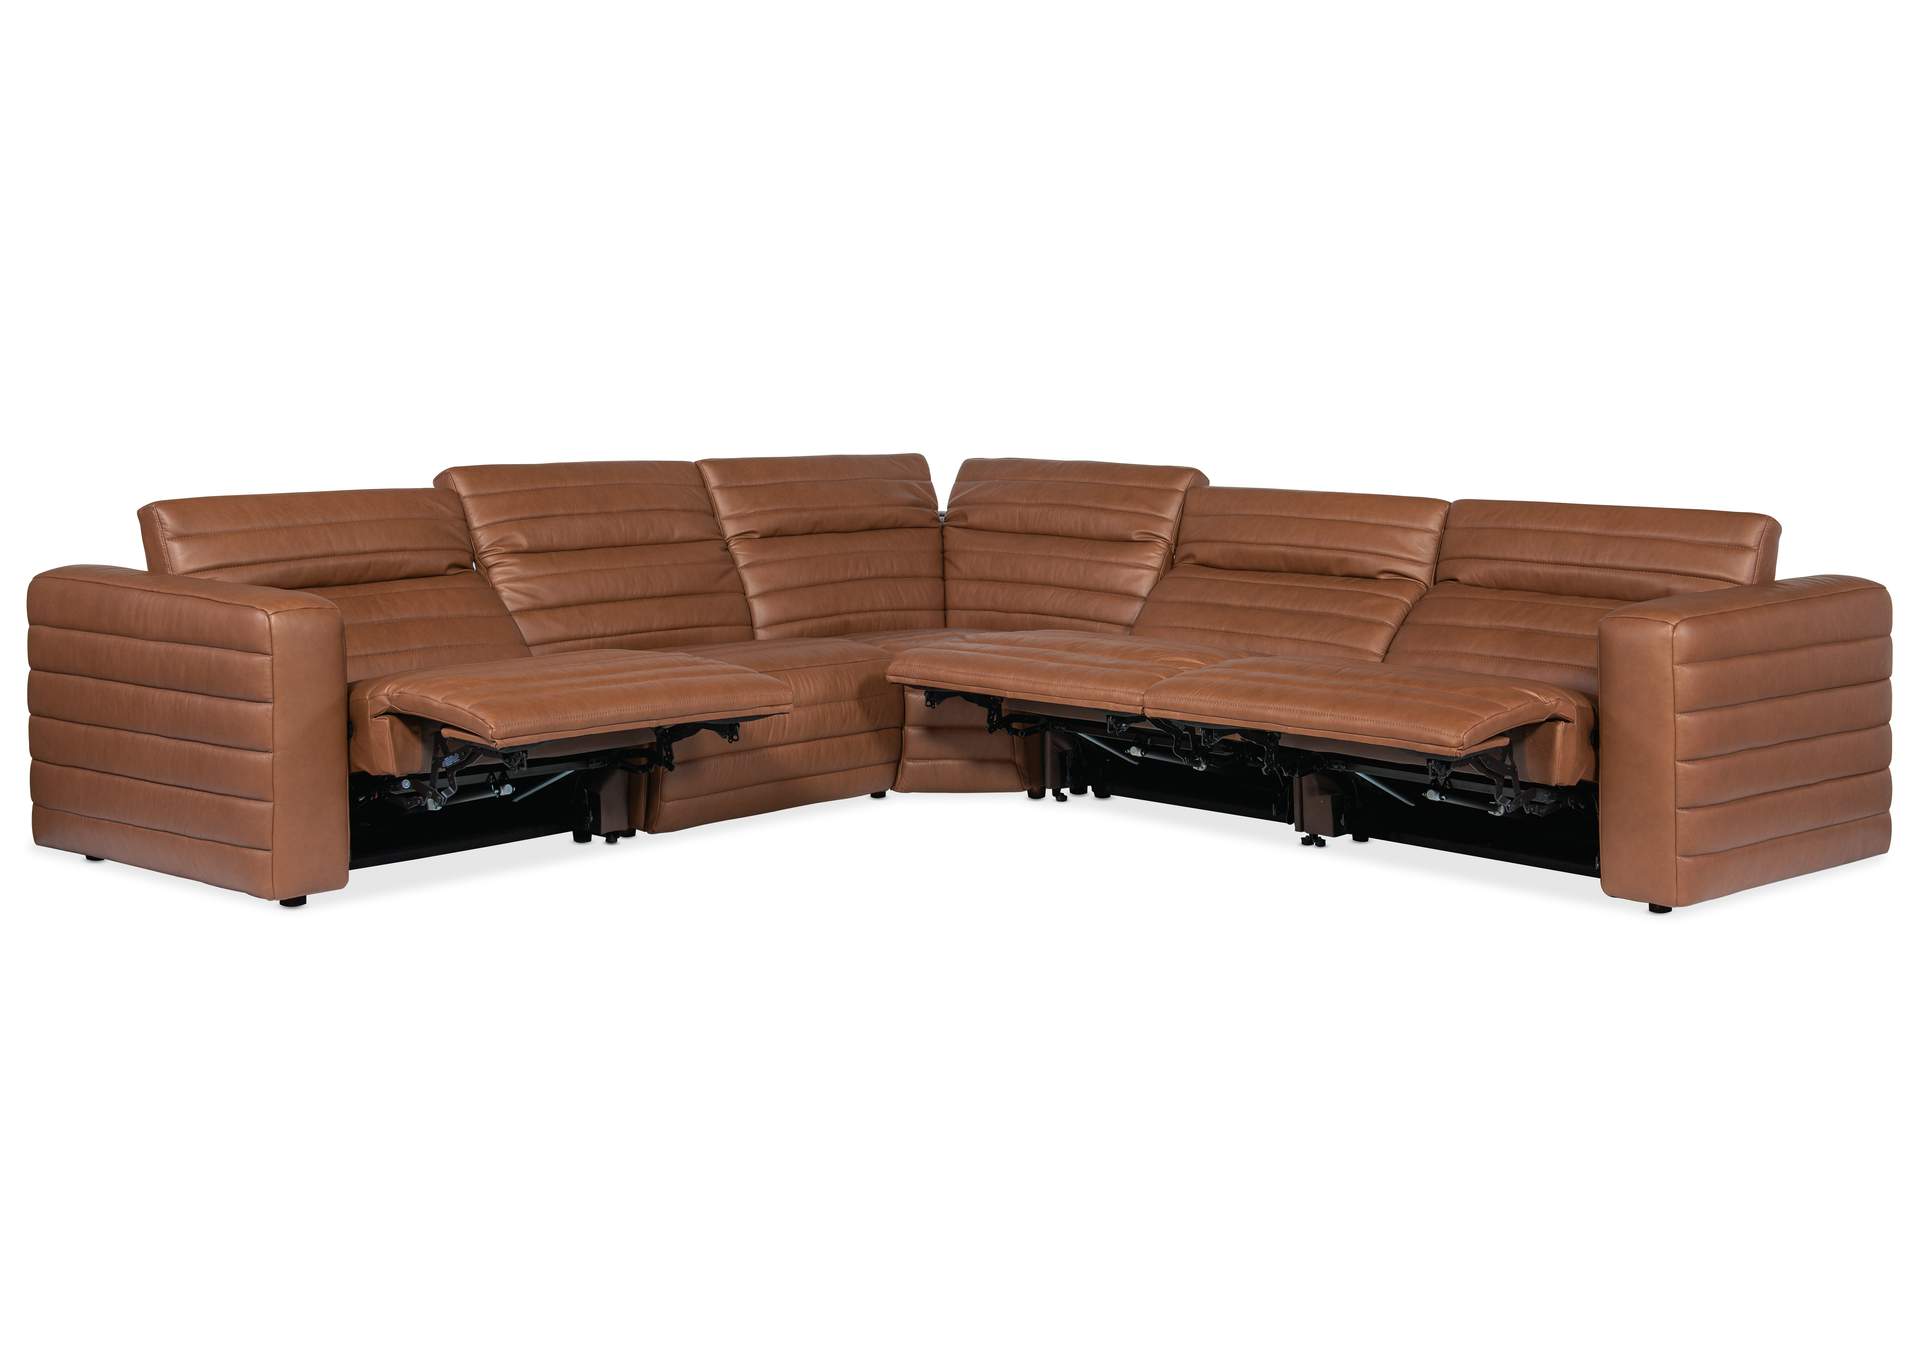 Chatelain 5-Piece Power Headrest Sectional with 2 Power Recliners,Hooker Furniture